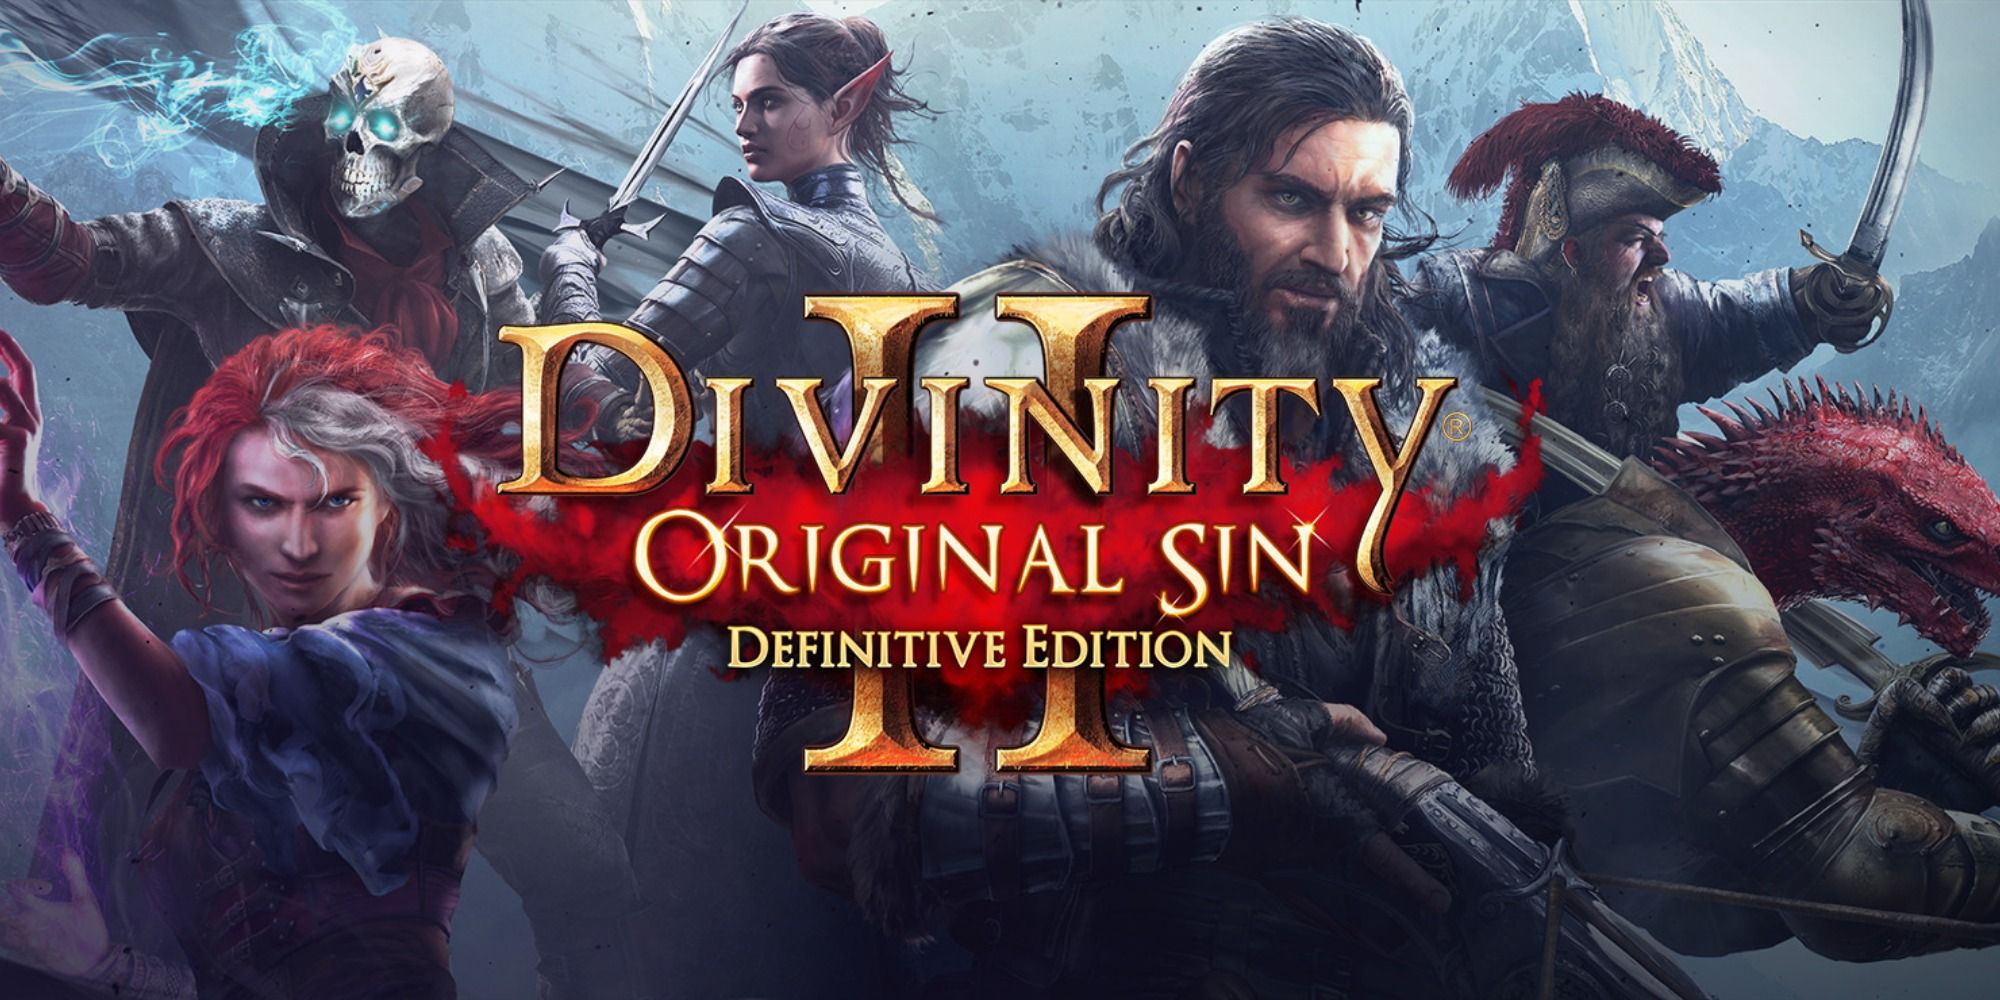 Title art for Divinity Original Sin with a group of heroes all posing and ready for battle with white mountains in the background